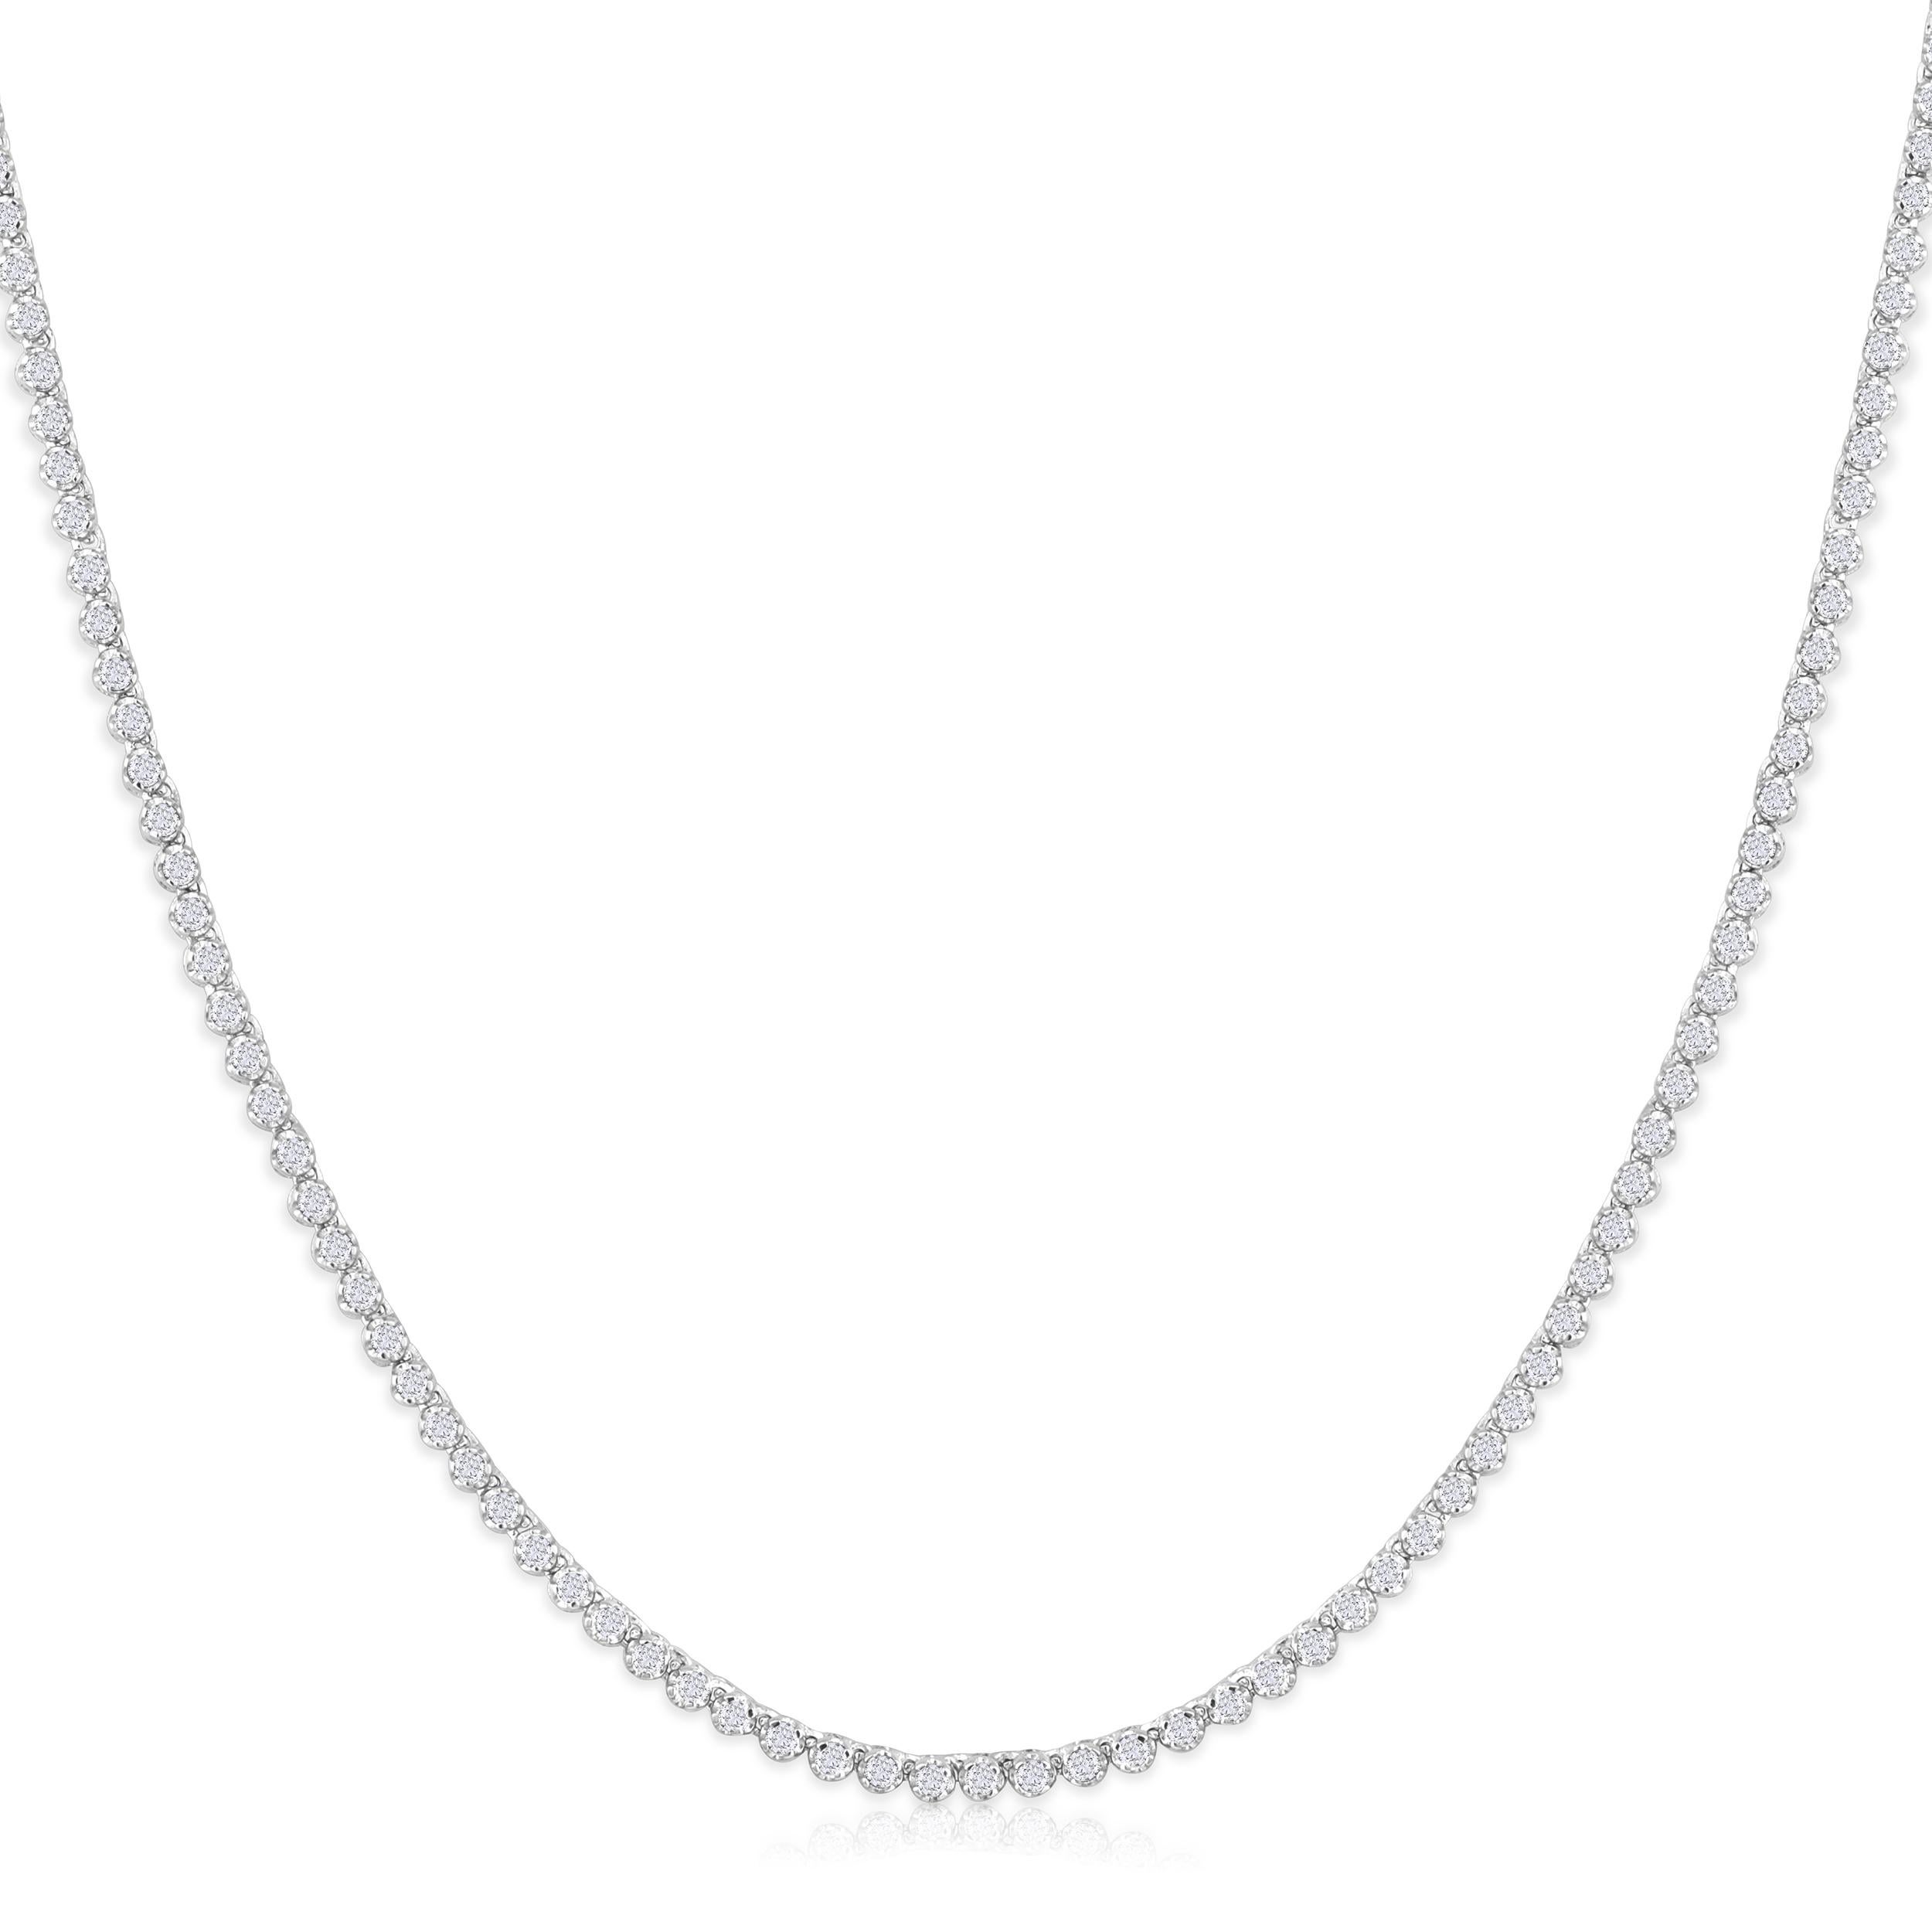 Crafted in 14.15 grams of 14K White Gold, the necklace contains 157 stones of Round Natural Diamonds with a total of 6.01 carat in G-H color and SI clarity. The necklace length is 18 inches.

CONTEMPORARY AND TIMELESS ESSENCE: Crafted in